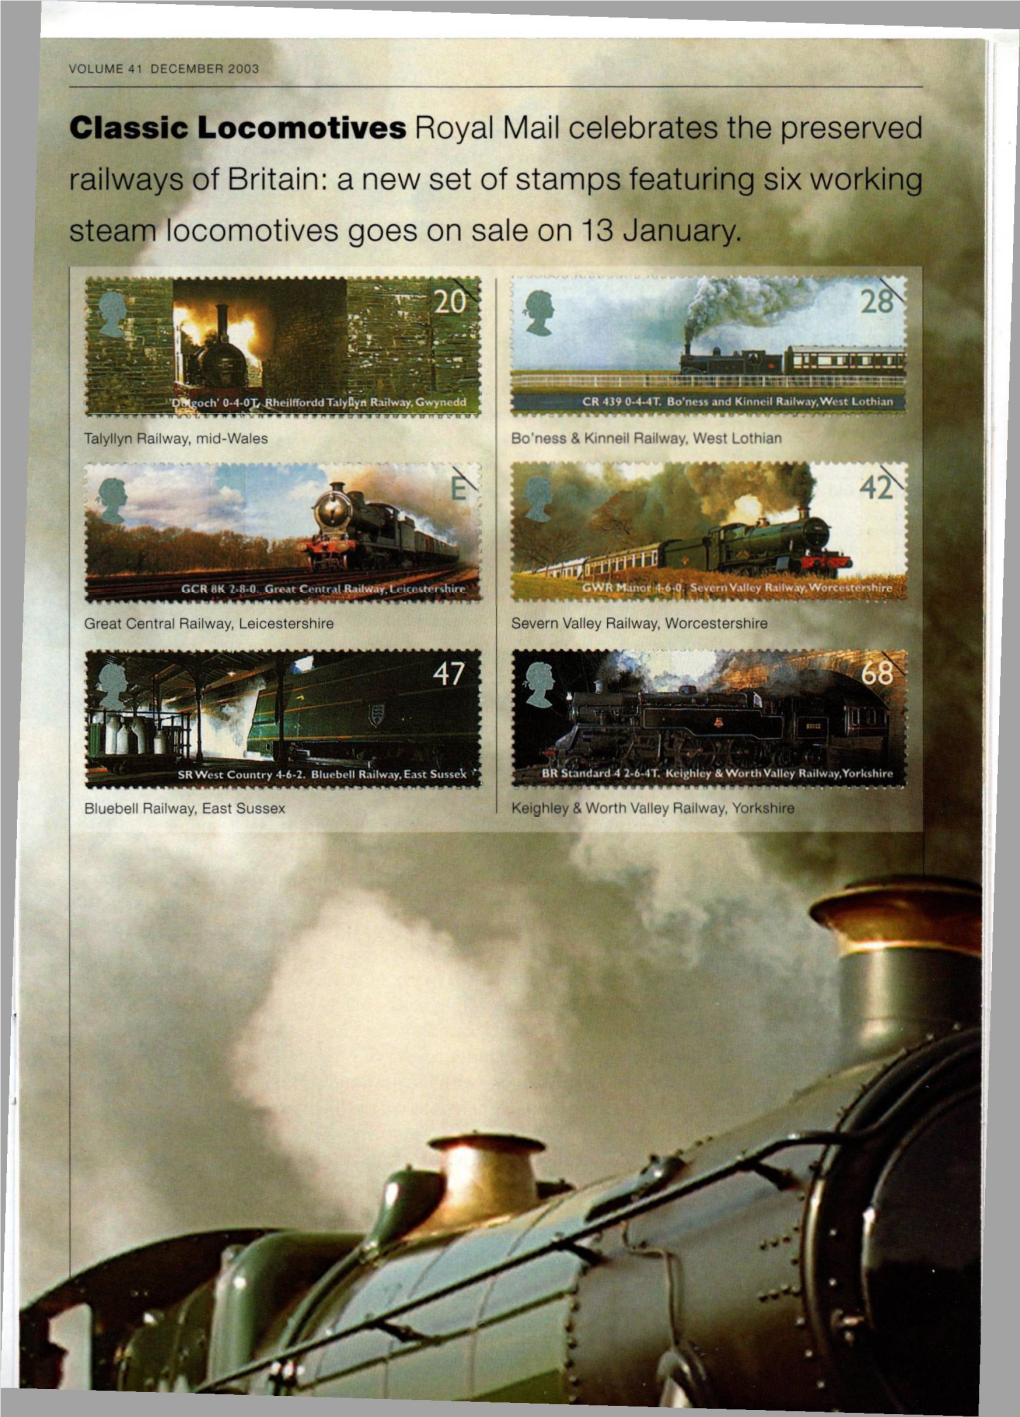 Classic Locomotives Royal Mail Celebrates the Preserved Railways of Britain: a New Set of Stamps Featuring Six Working Steam Locomotives Goes on Sale on 13 January